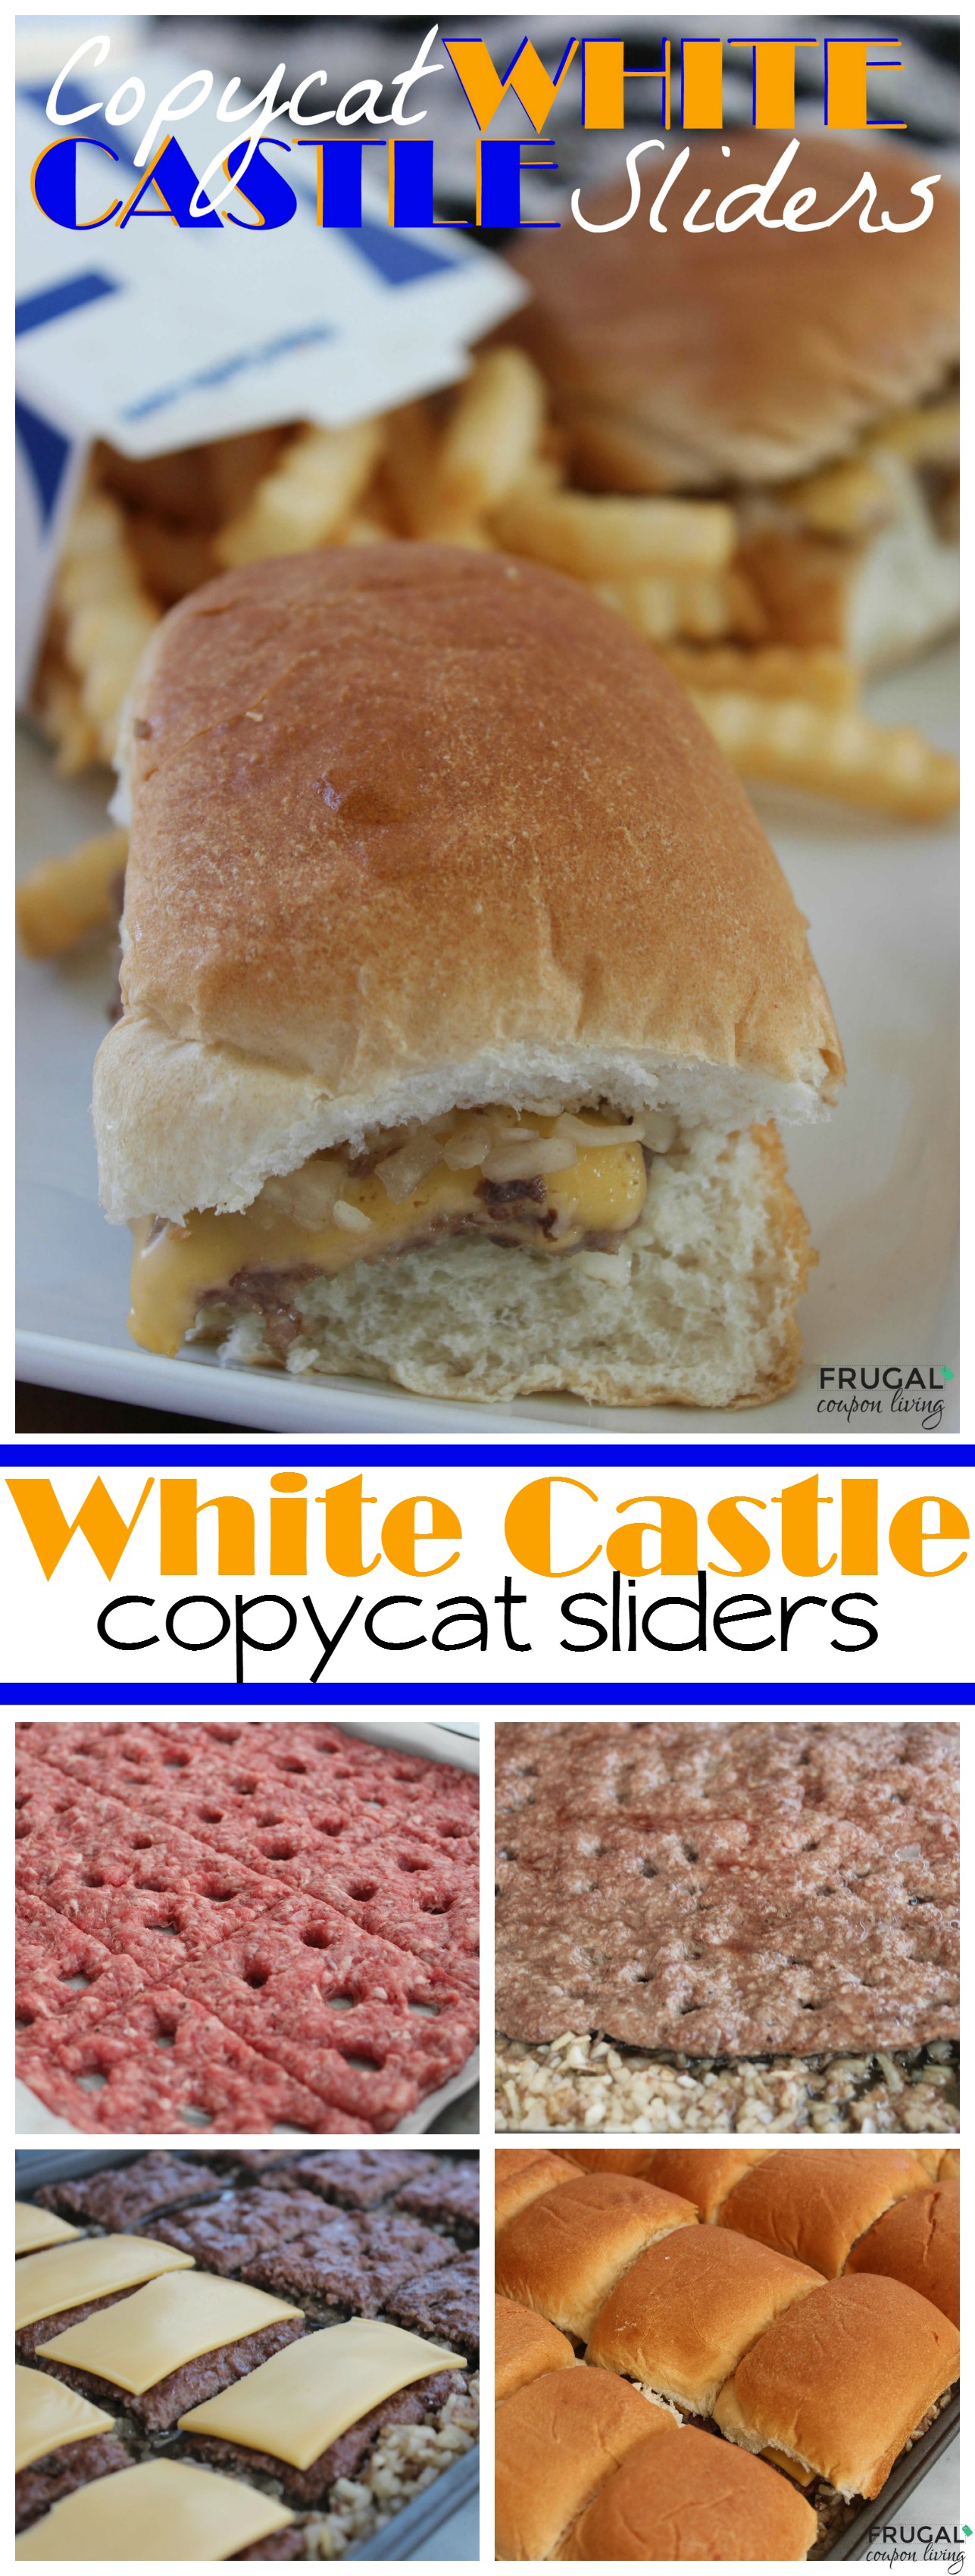 Copycat-White-Castle-Sliders-Collage-Frugal-Coupon-Living